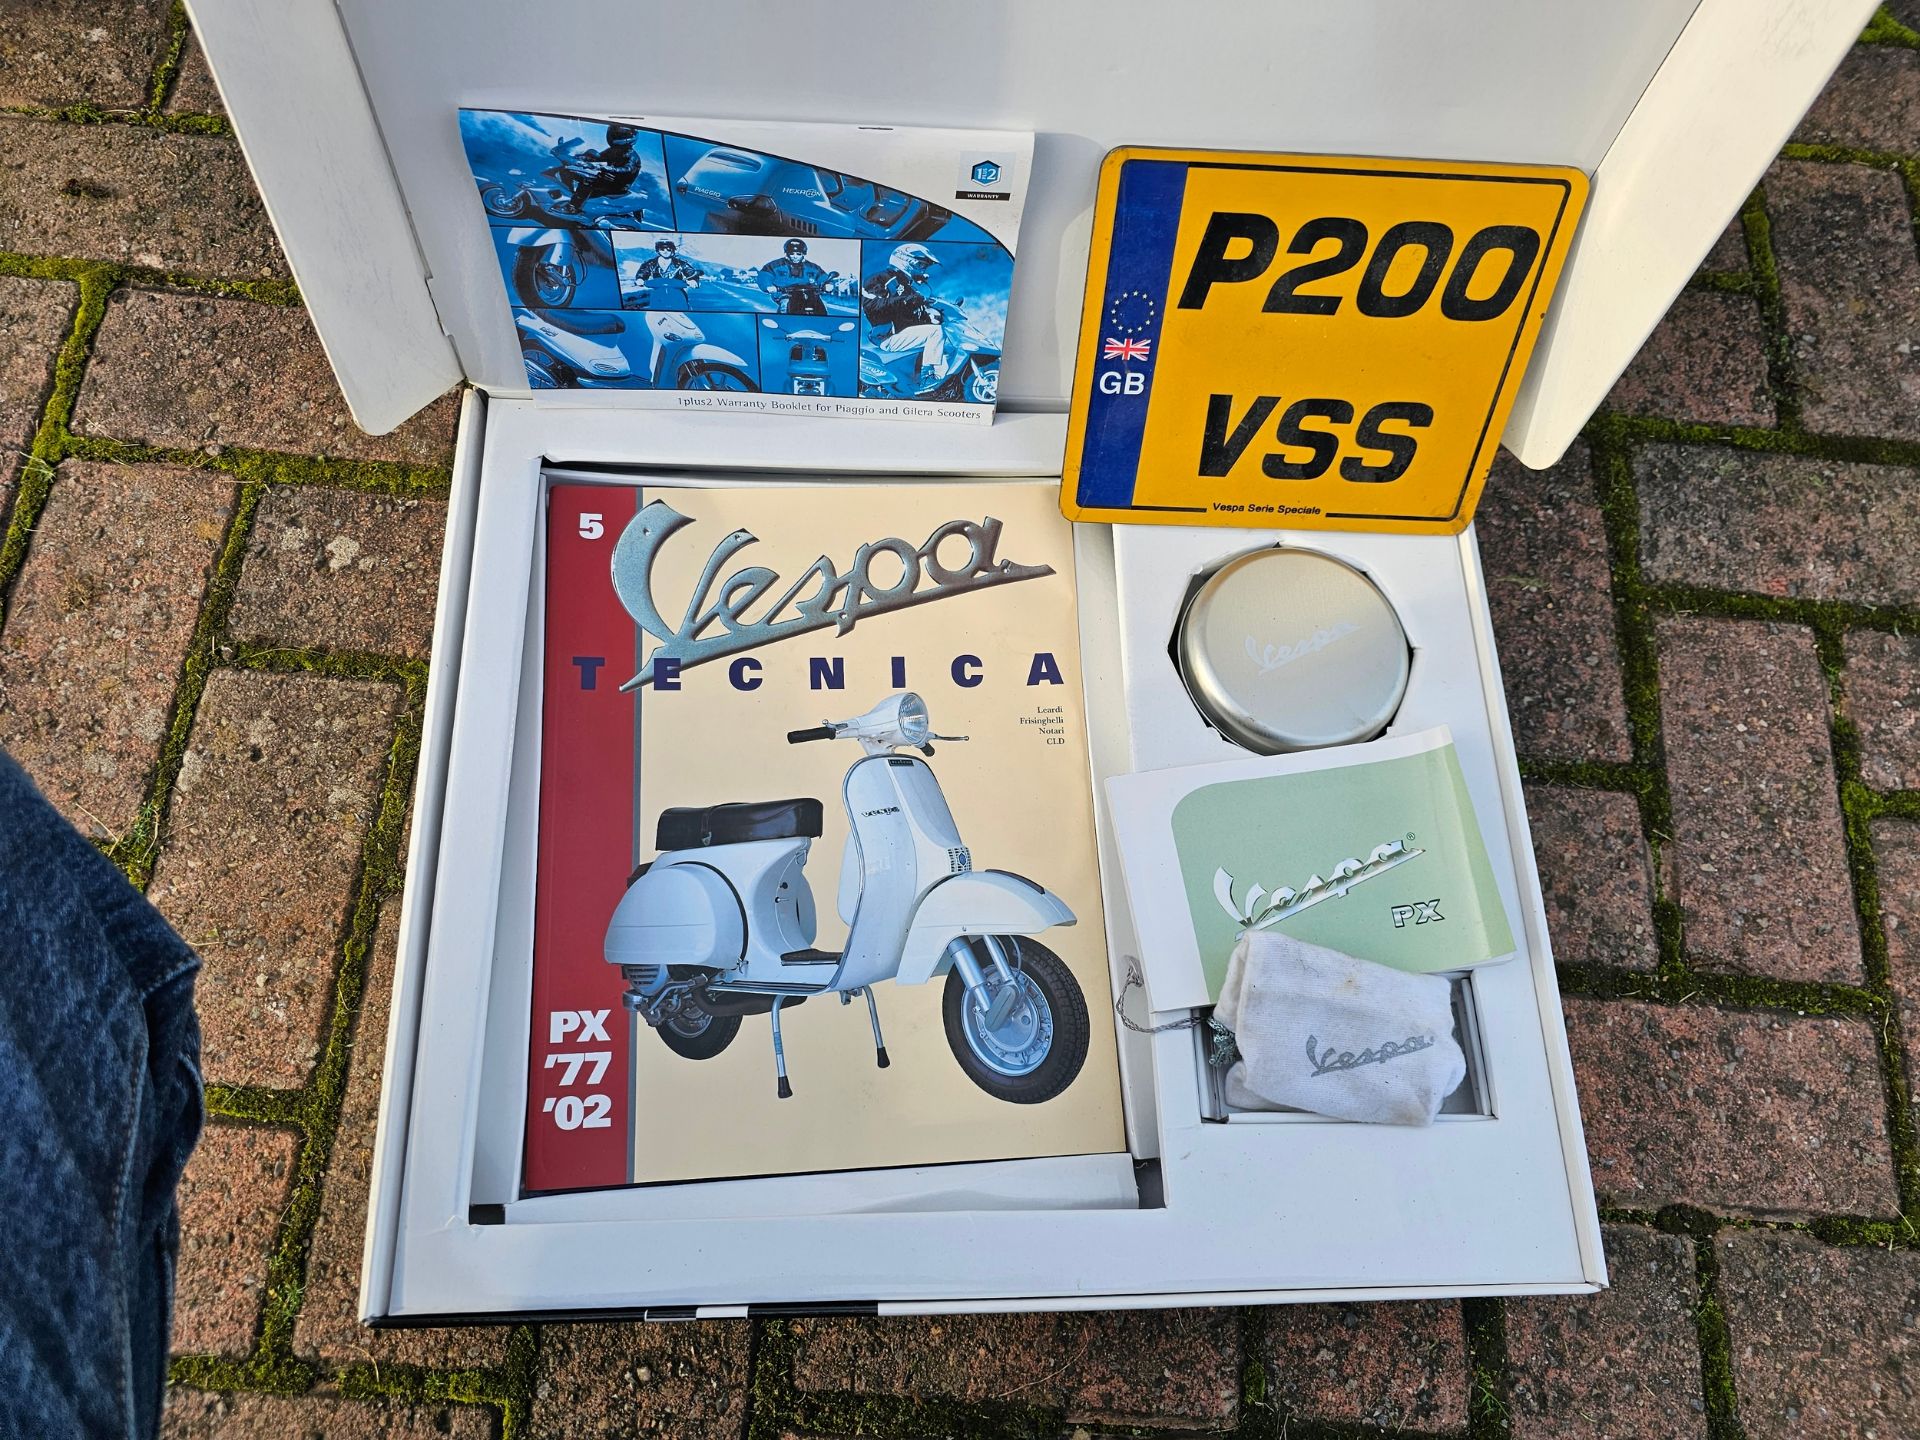 2003 Piaggio Vespa PX200 Serie Speciale Limited Edition 102/400, 198cc. Registration number P200 - Image 9 of 9